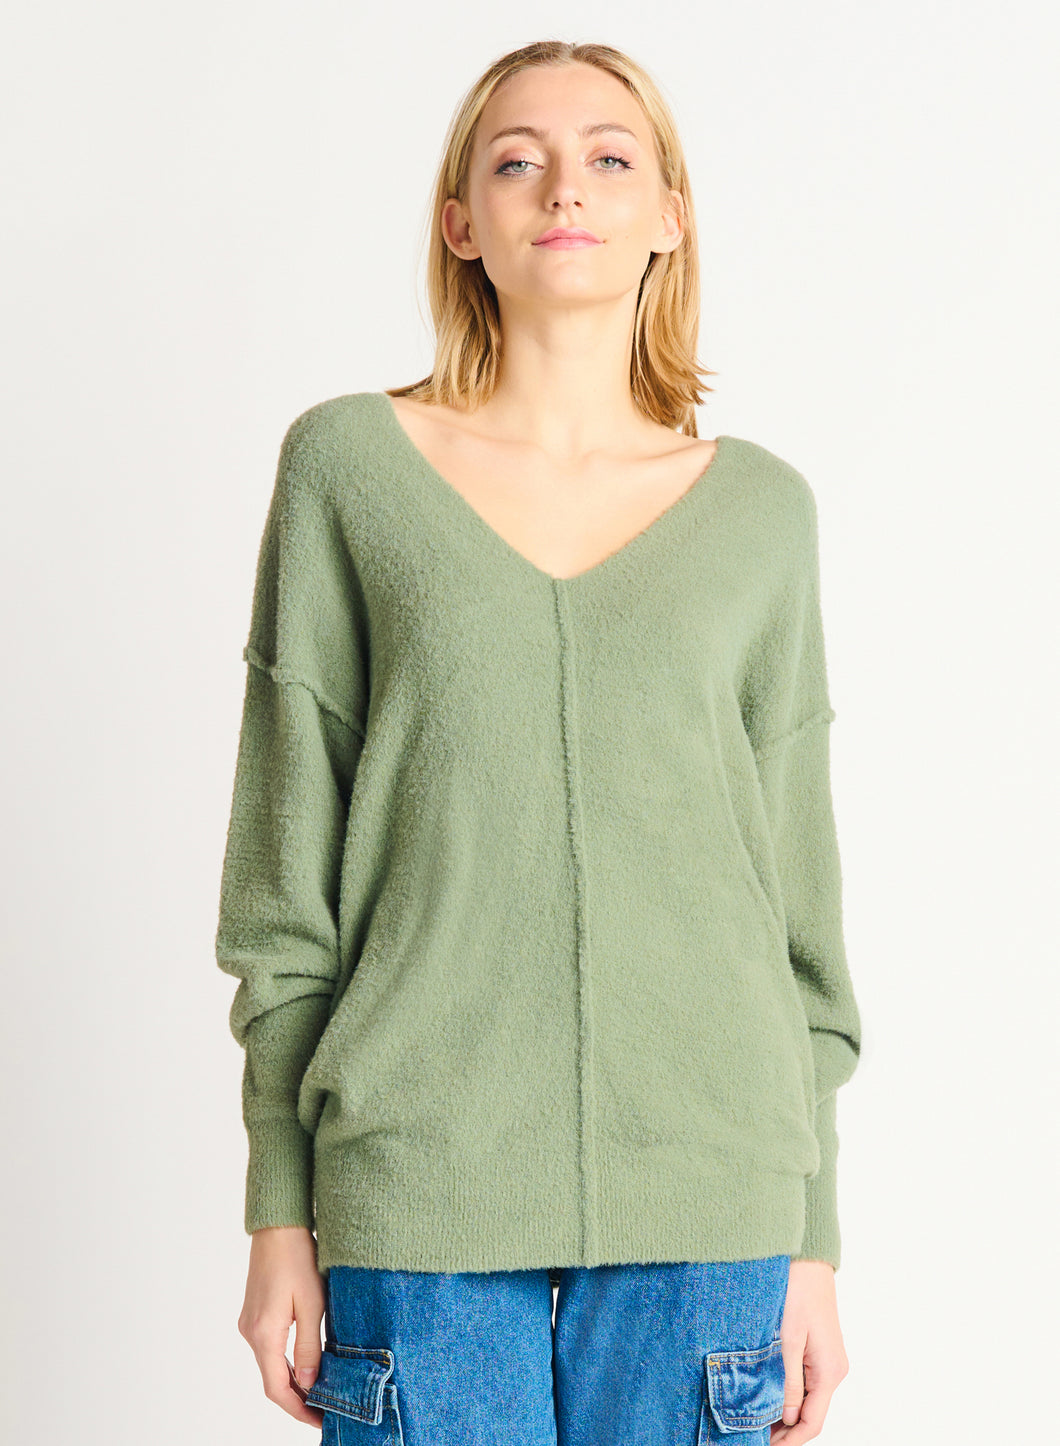 ULTRA SOFT V-NECK SWEATER by Dex (available in plus sizes)